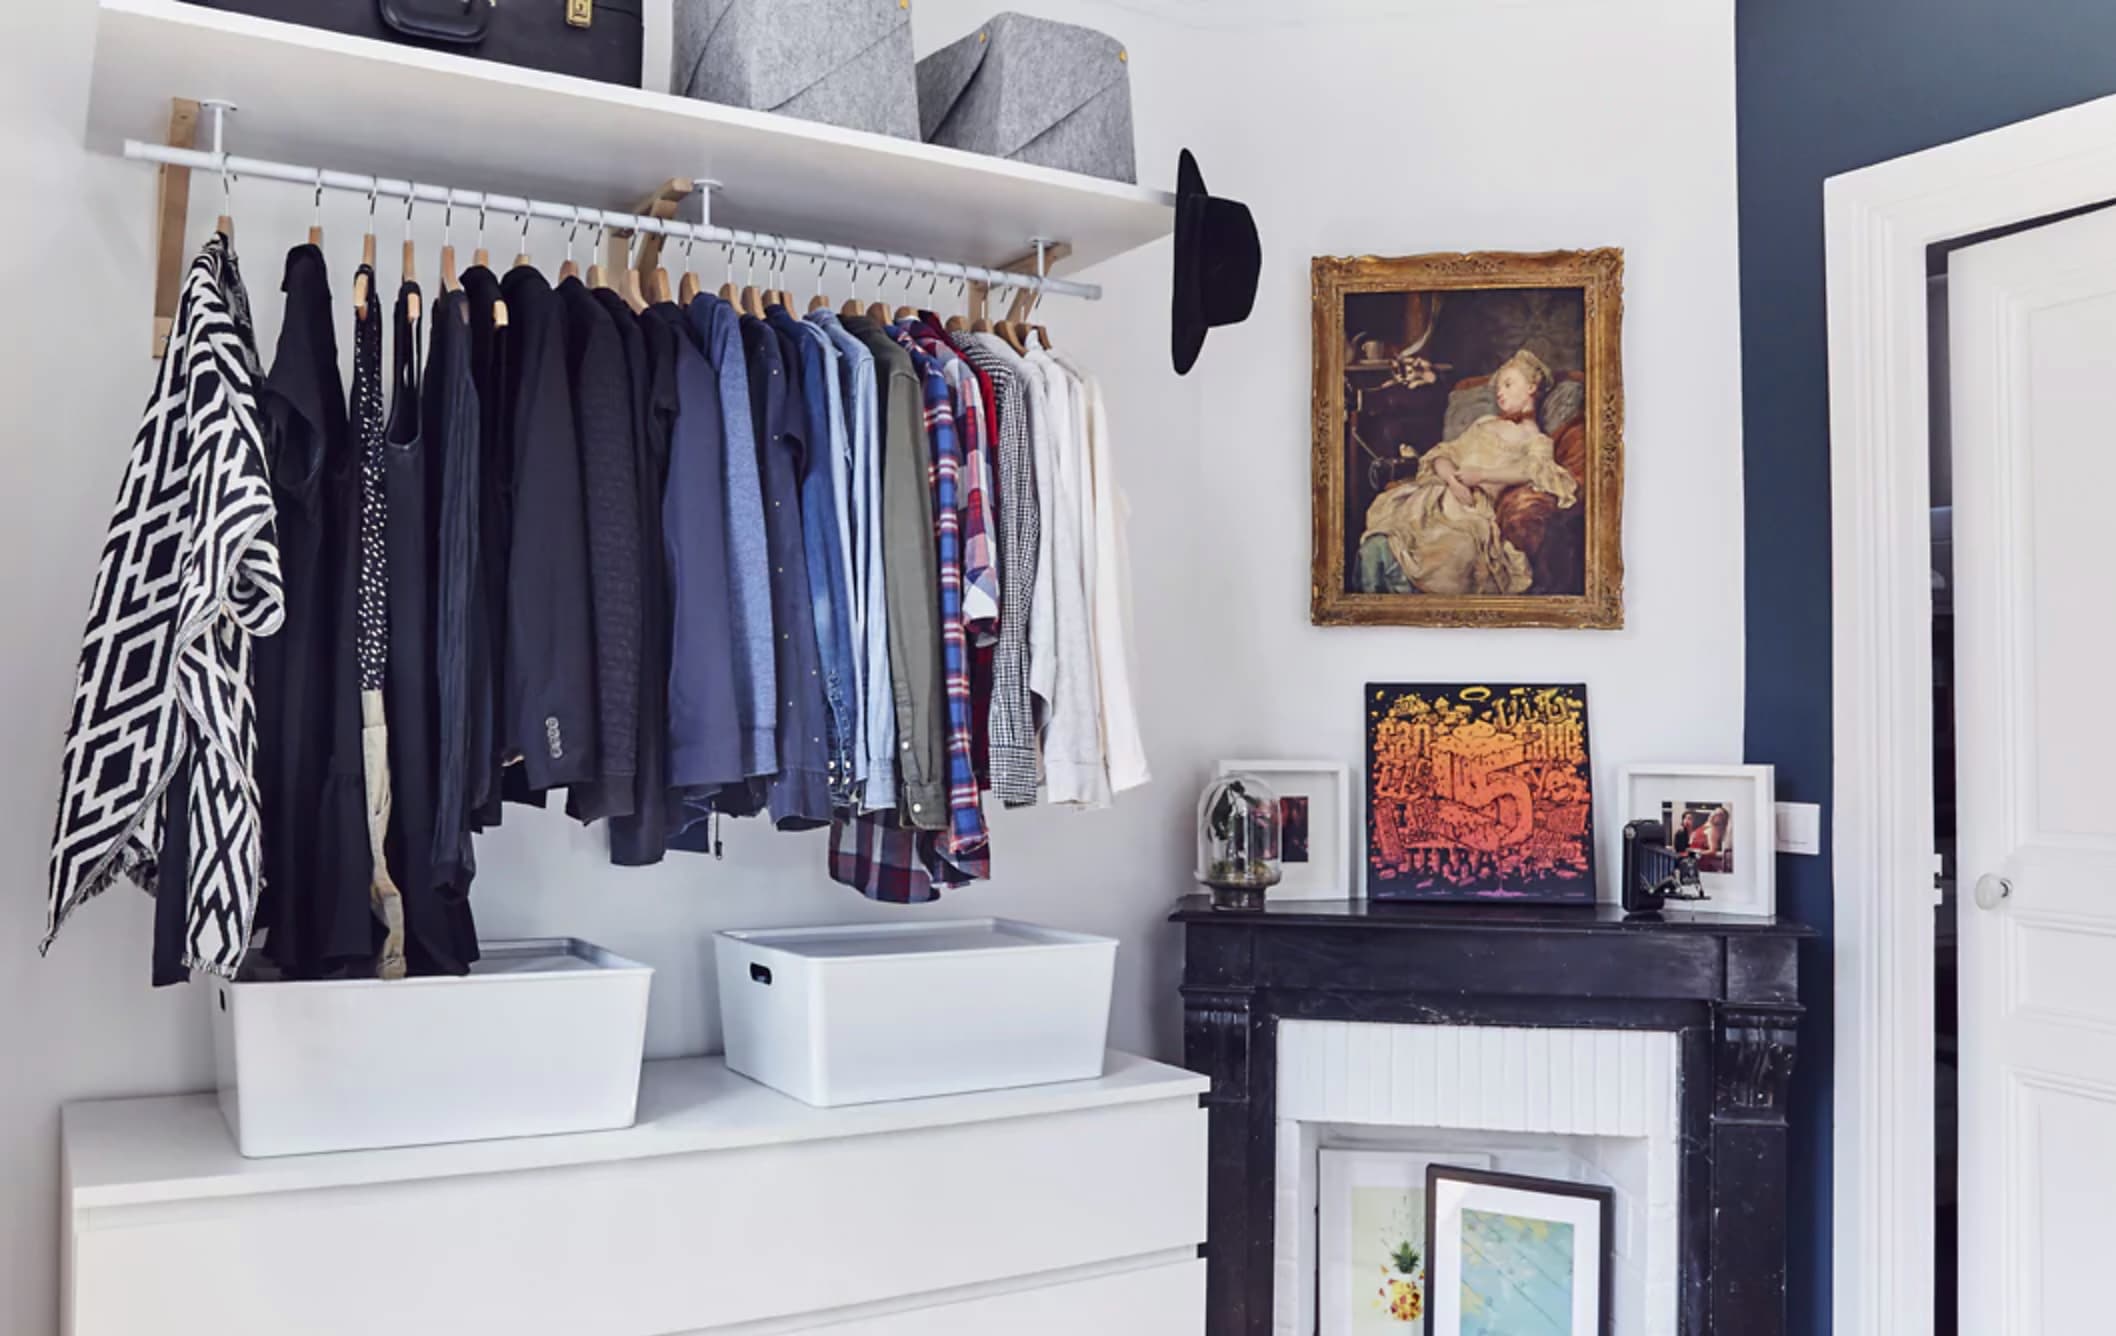 How to safely store your summer clothes - IKEA